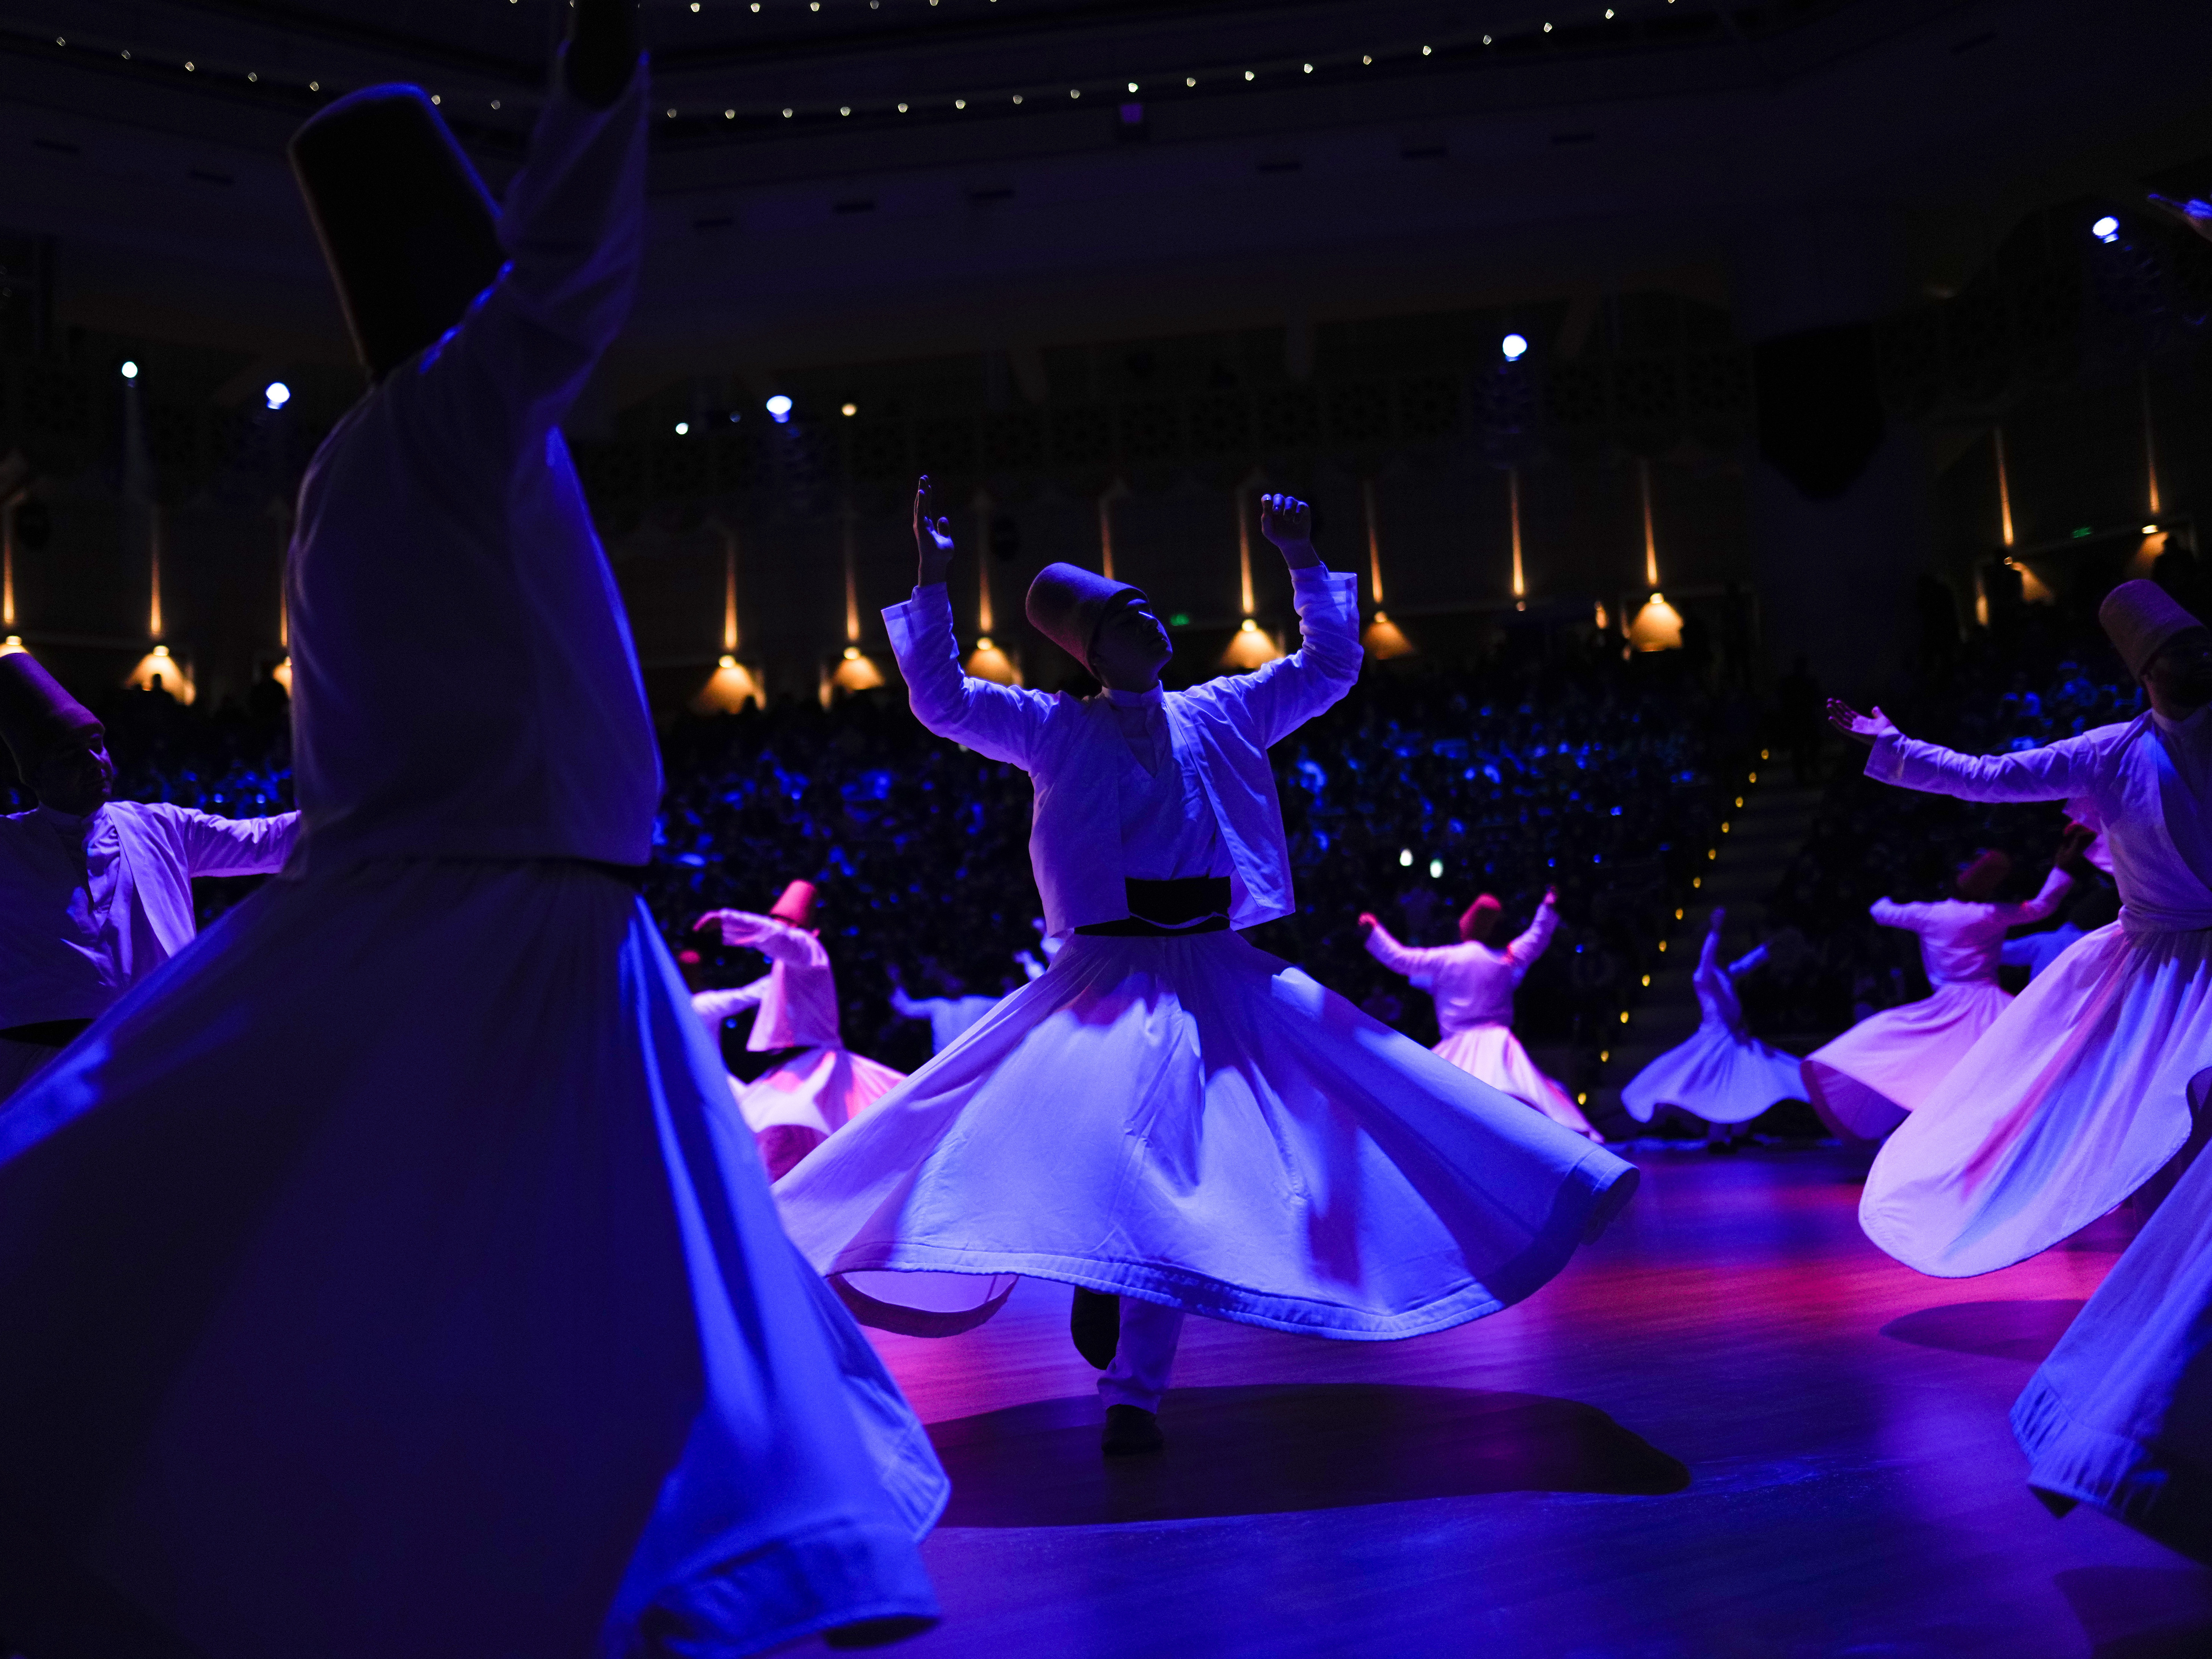 Photos: Whirling dervish ritual honors Rumi, the Sufi mystic poet